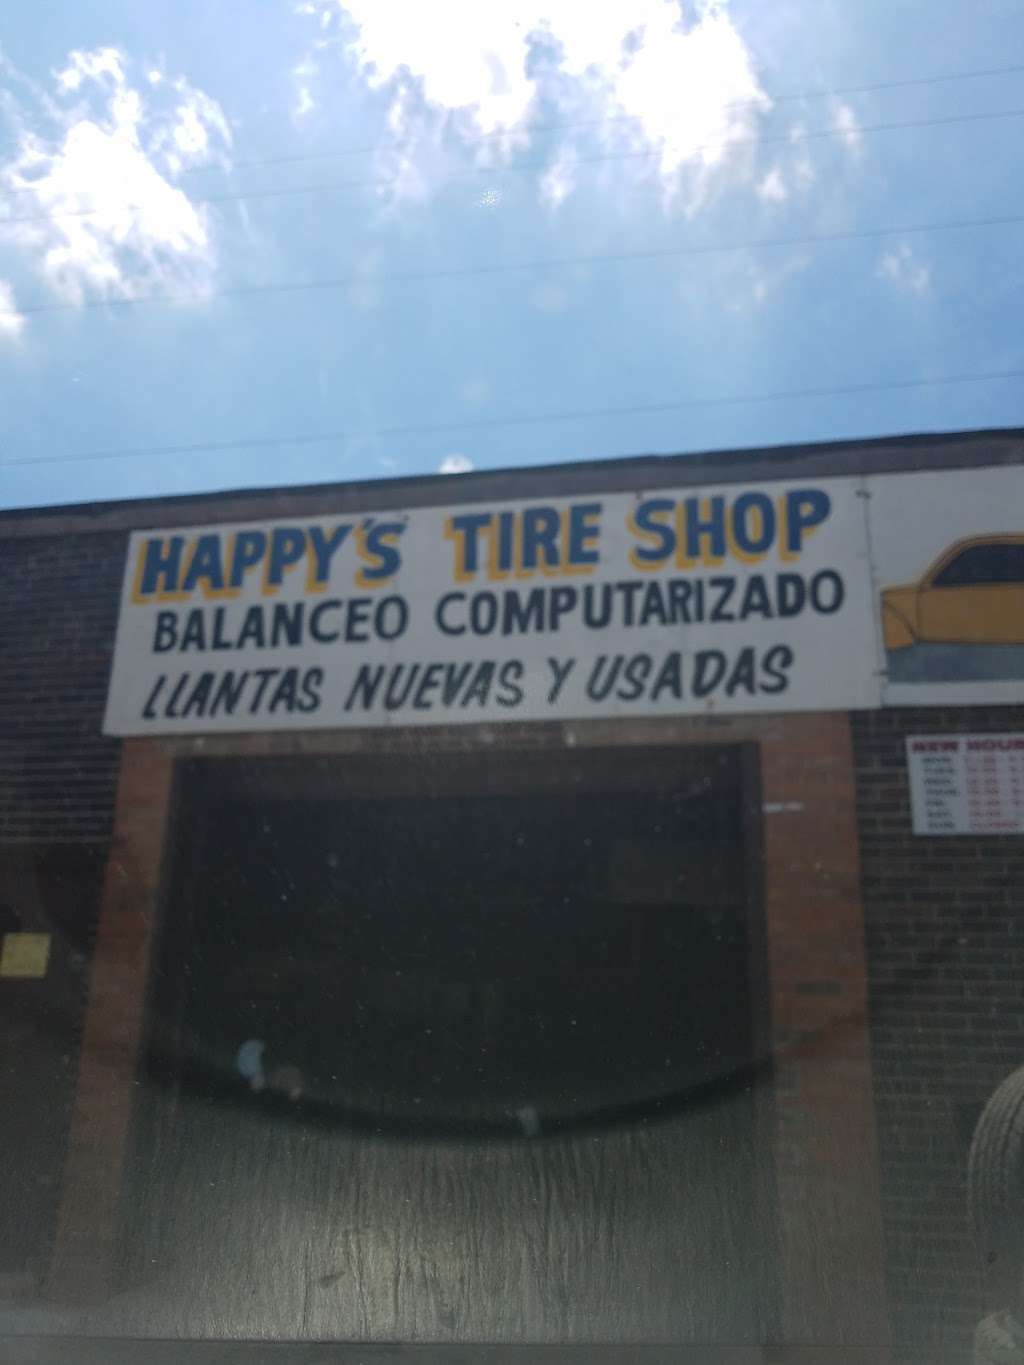 Happys Tire Shop | 2903 Southeastern Ave, Indianapolis, IN 46203 | Phone: (317) 536-1638